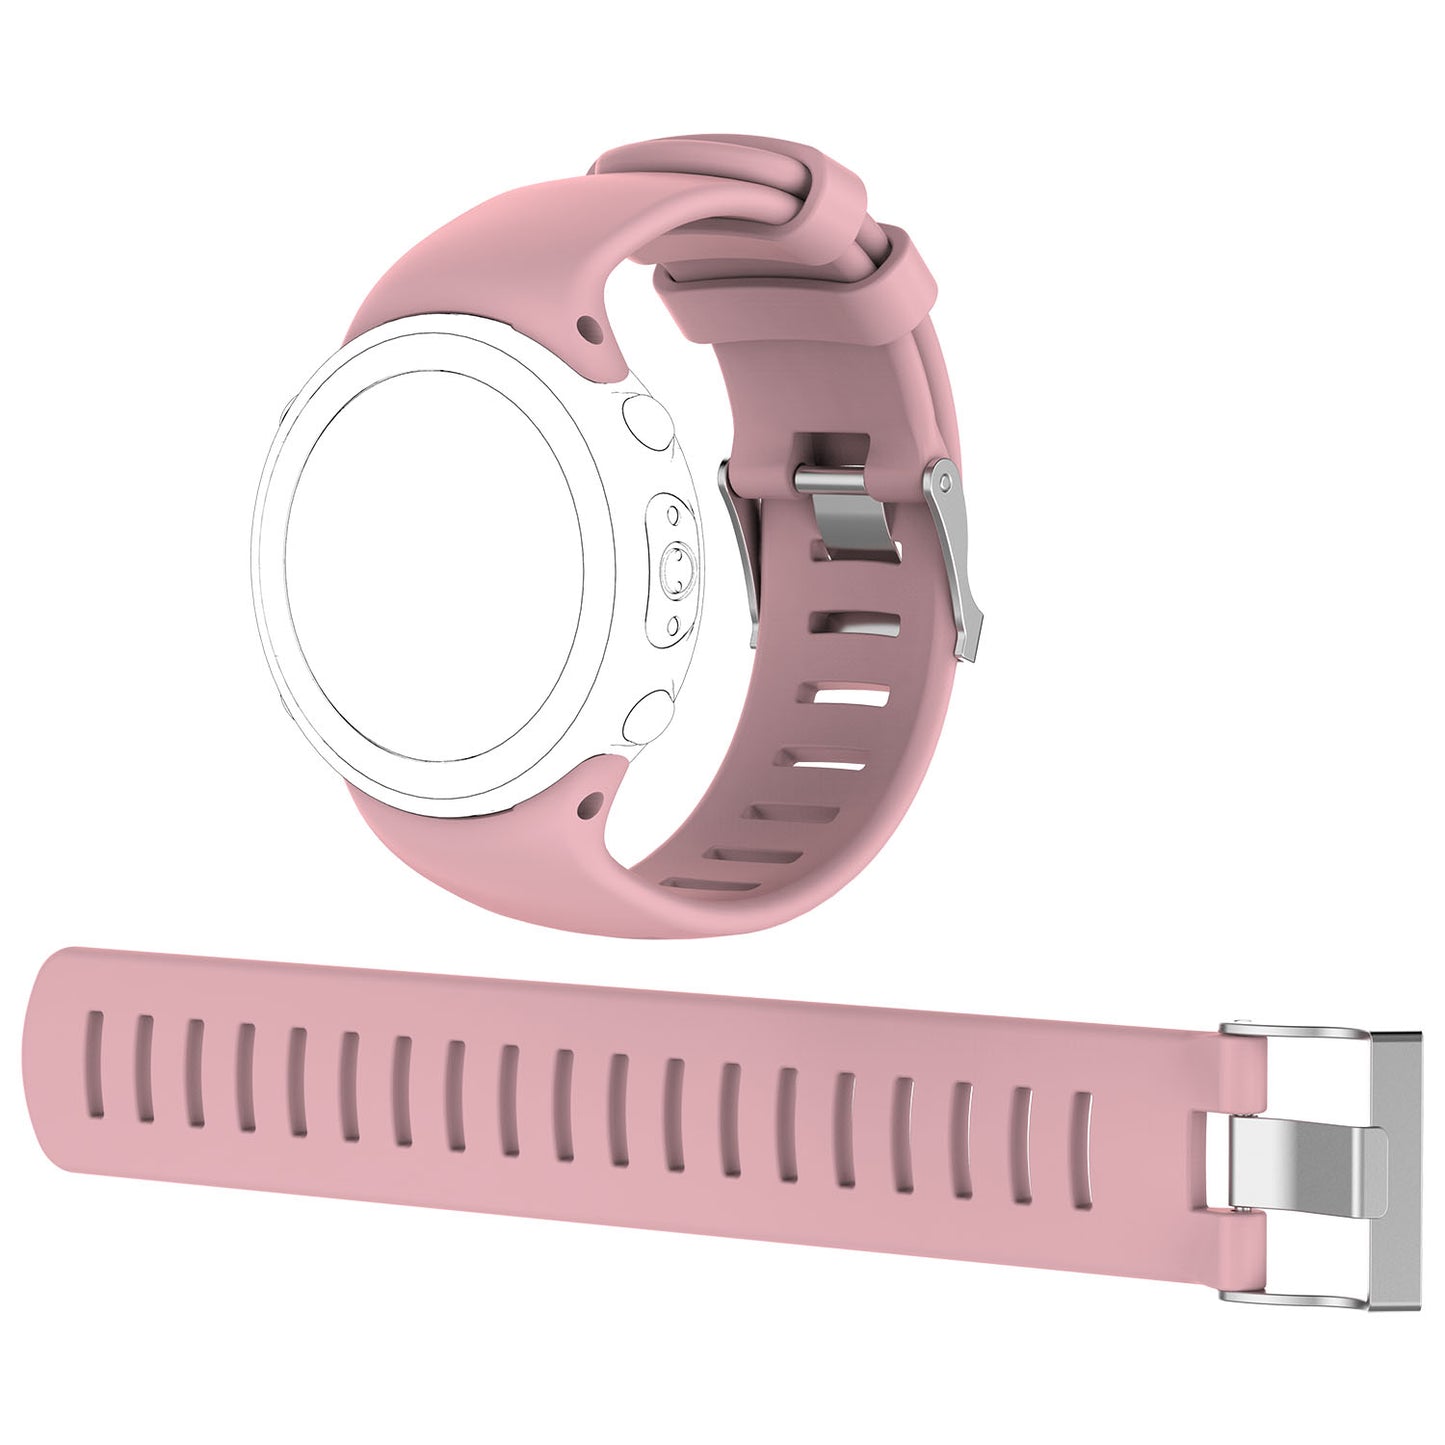 Replacement Strap for Polar M430 GPS Running Watch